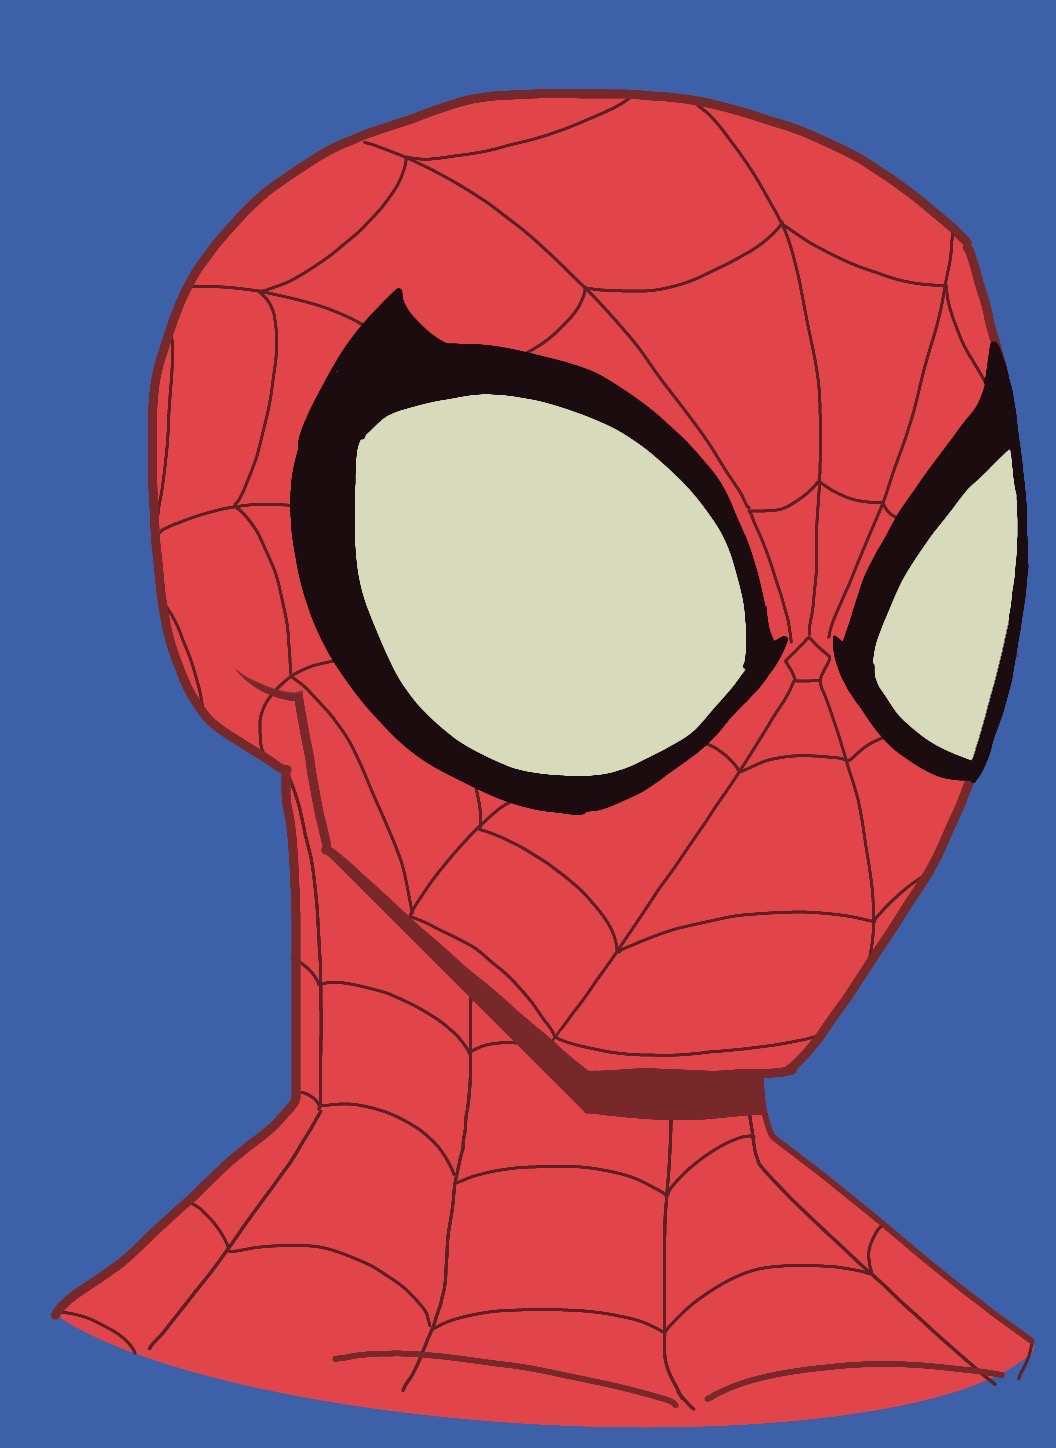 Spider-Man (Spectacular Colors) by Bluespider17 on DeviantArt